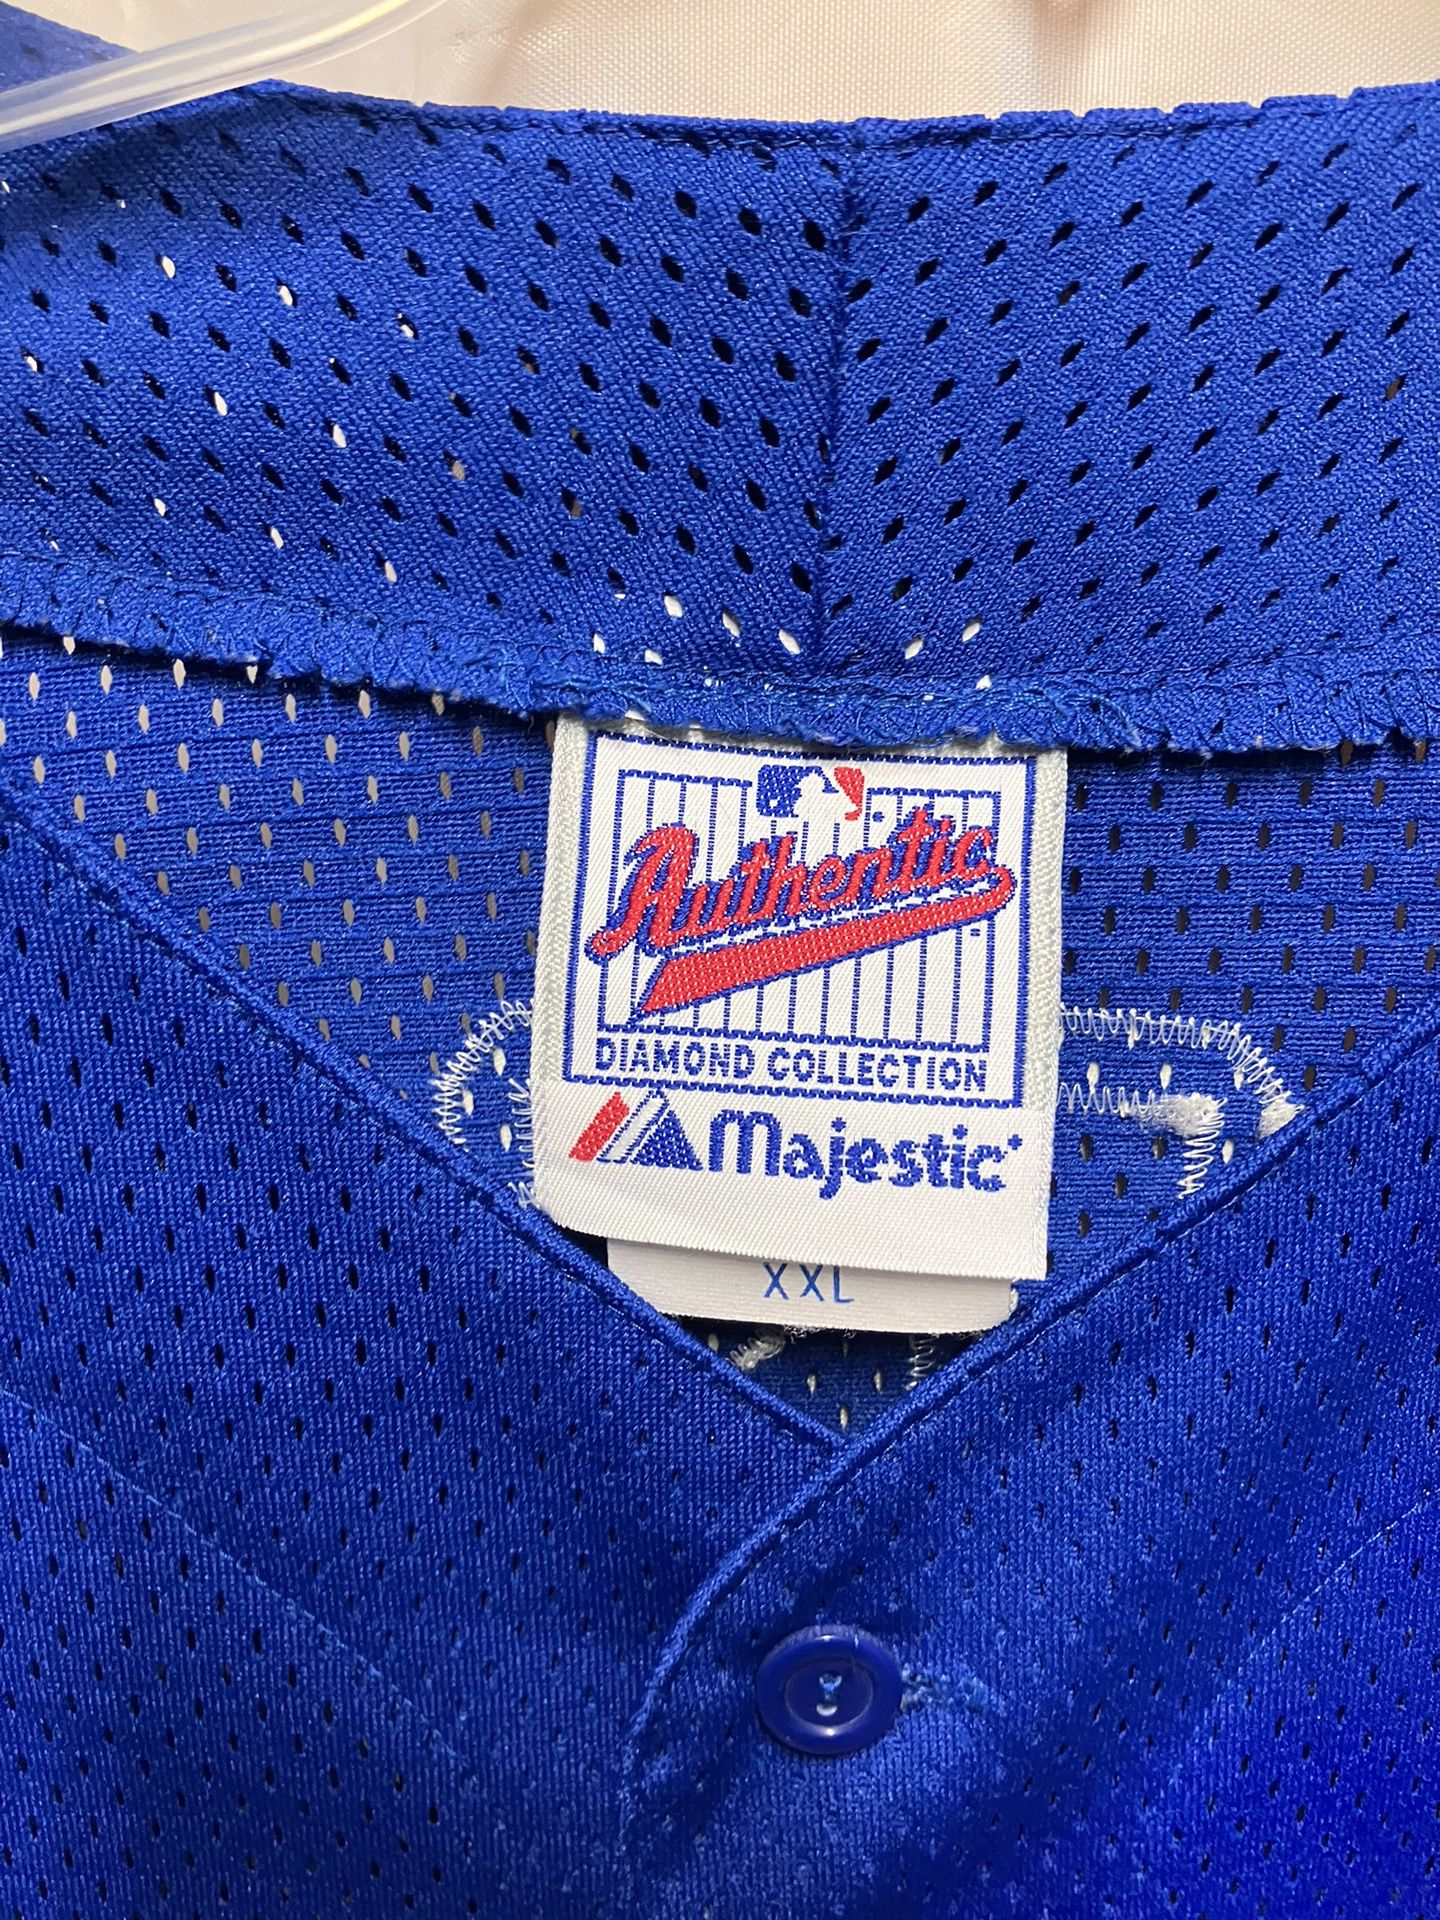 90s/00s Chicago Cubs Vintage Mirage Mlb Baseball Jersey By Mirage